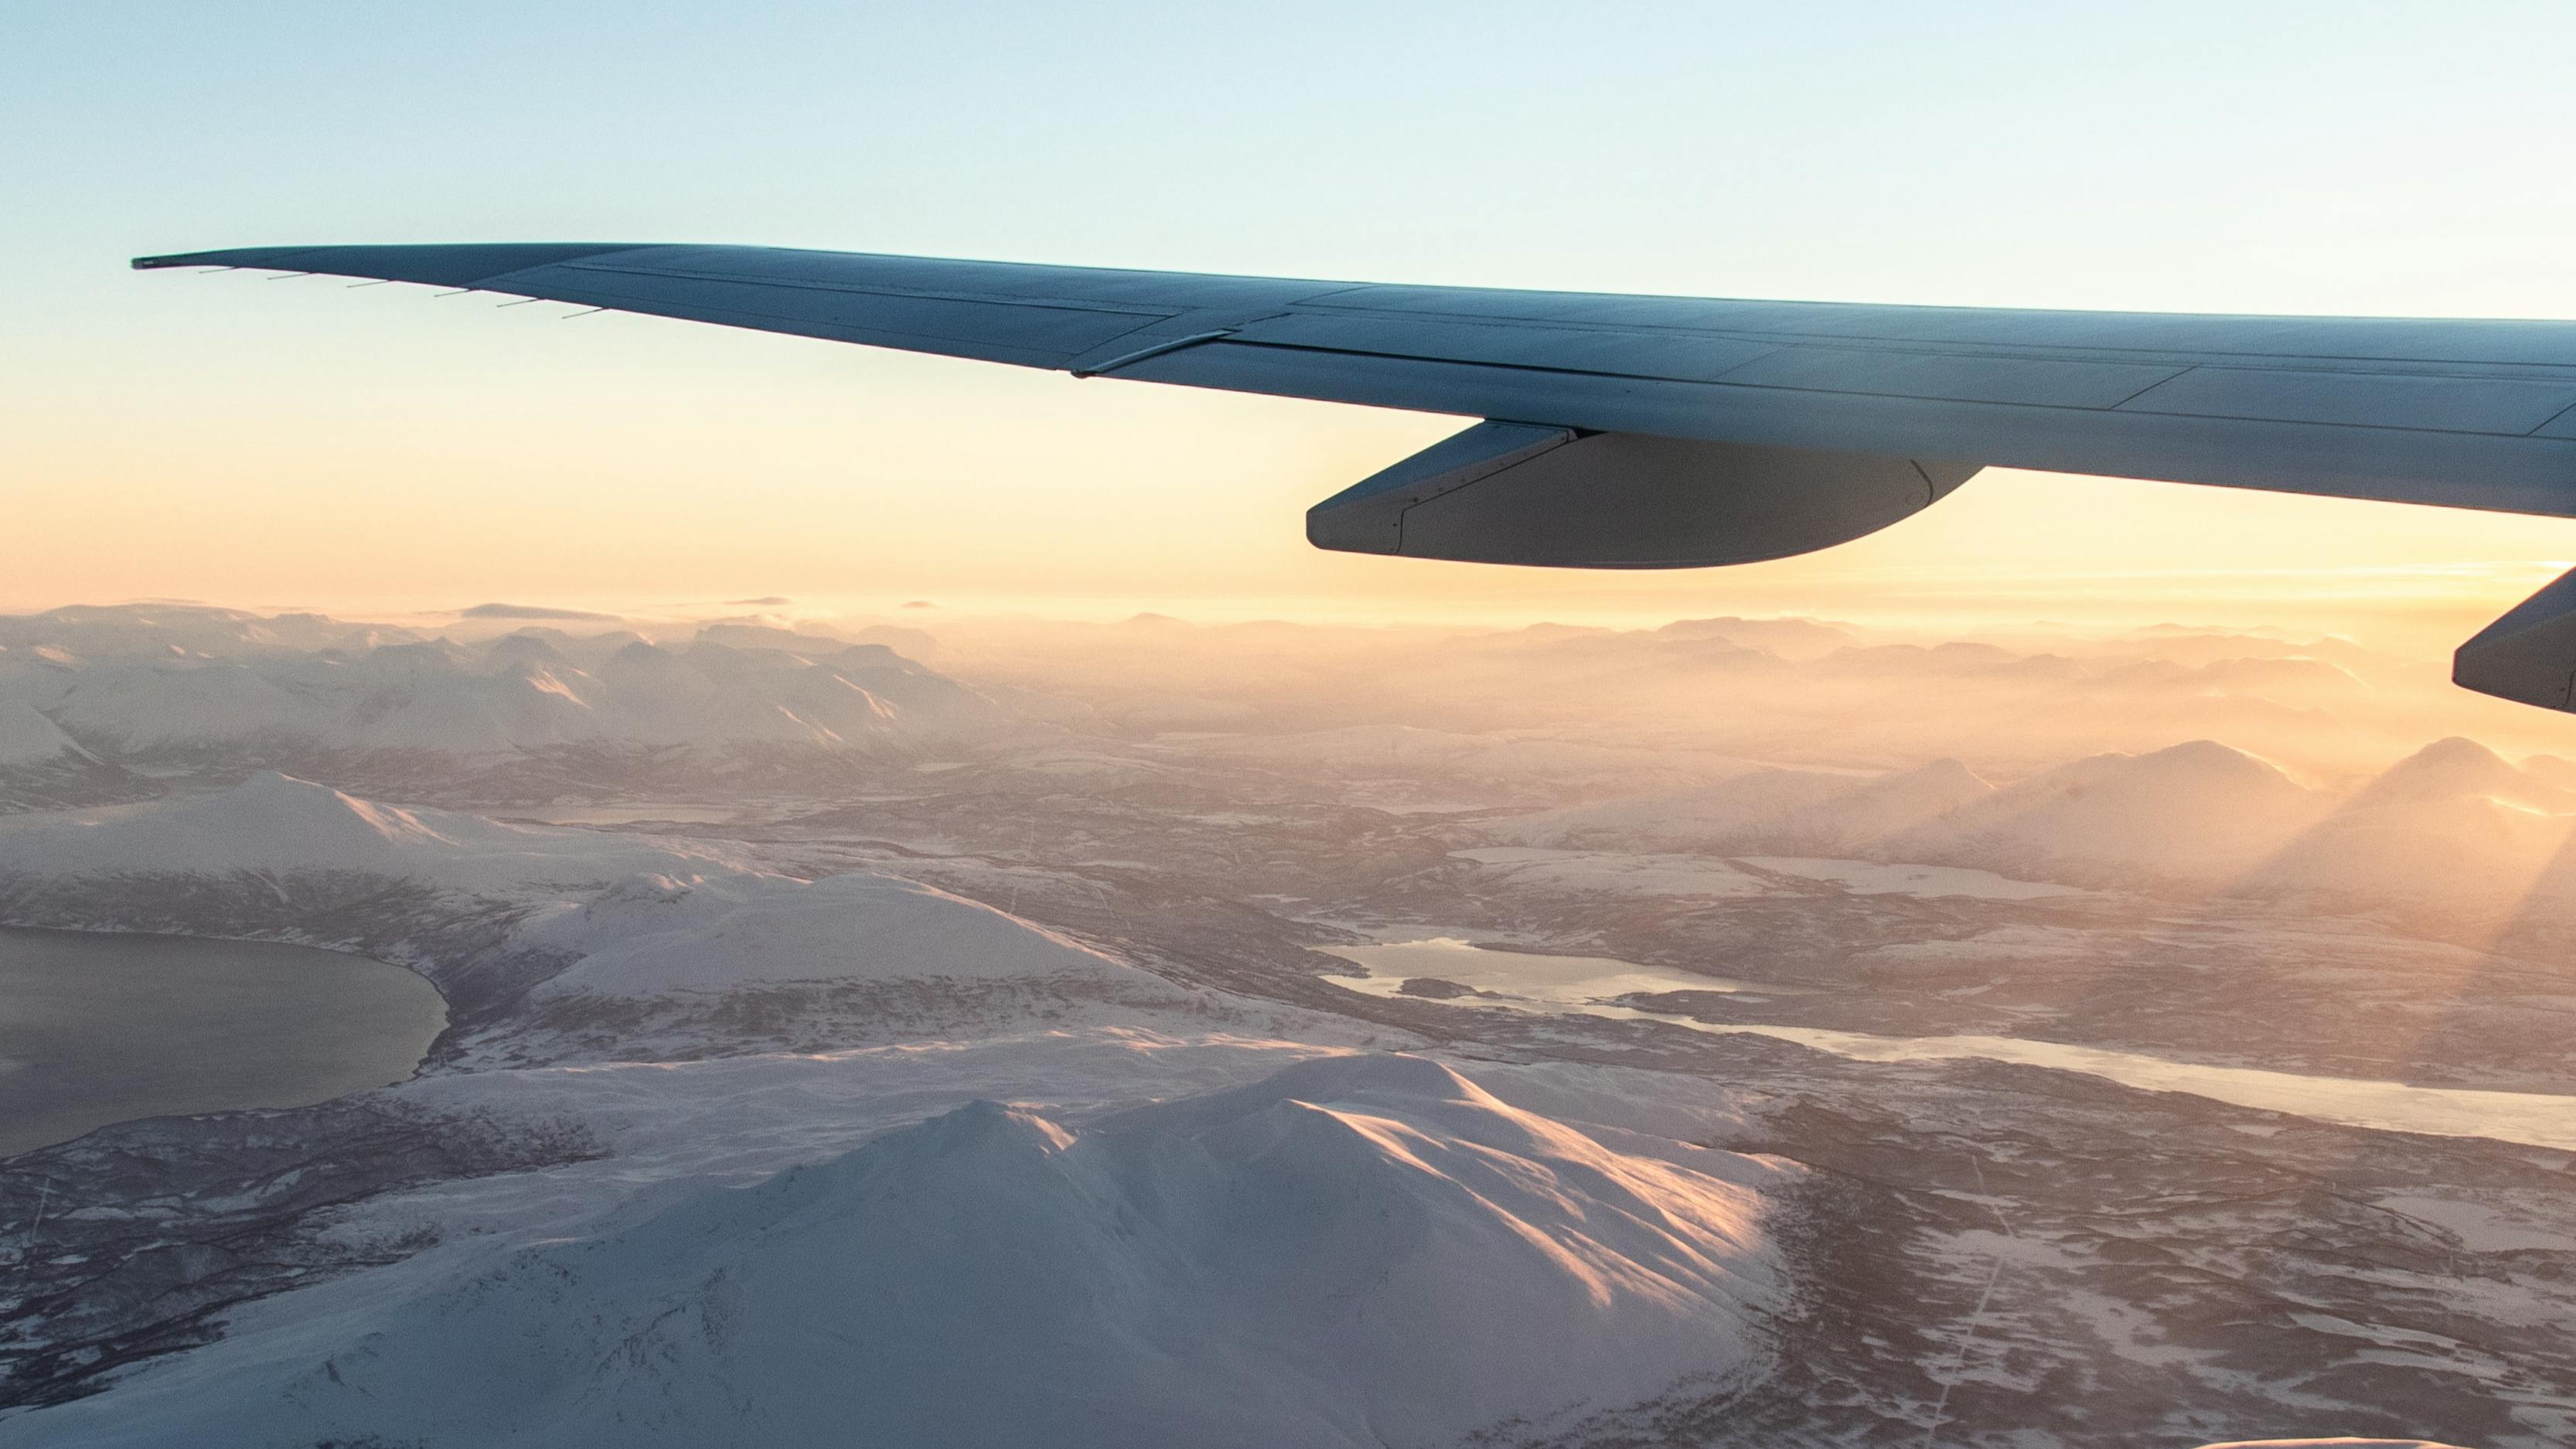 Someone looks at the wing of an airplane through the window. The sun is setting on a snowy landscape on the ground below. 